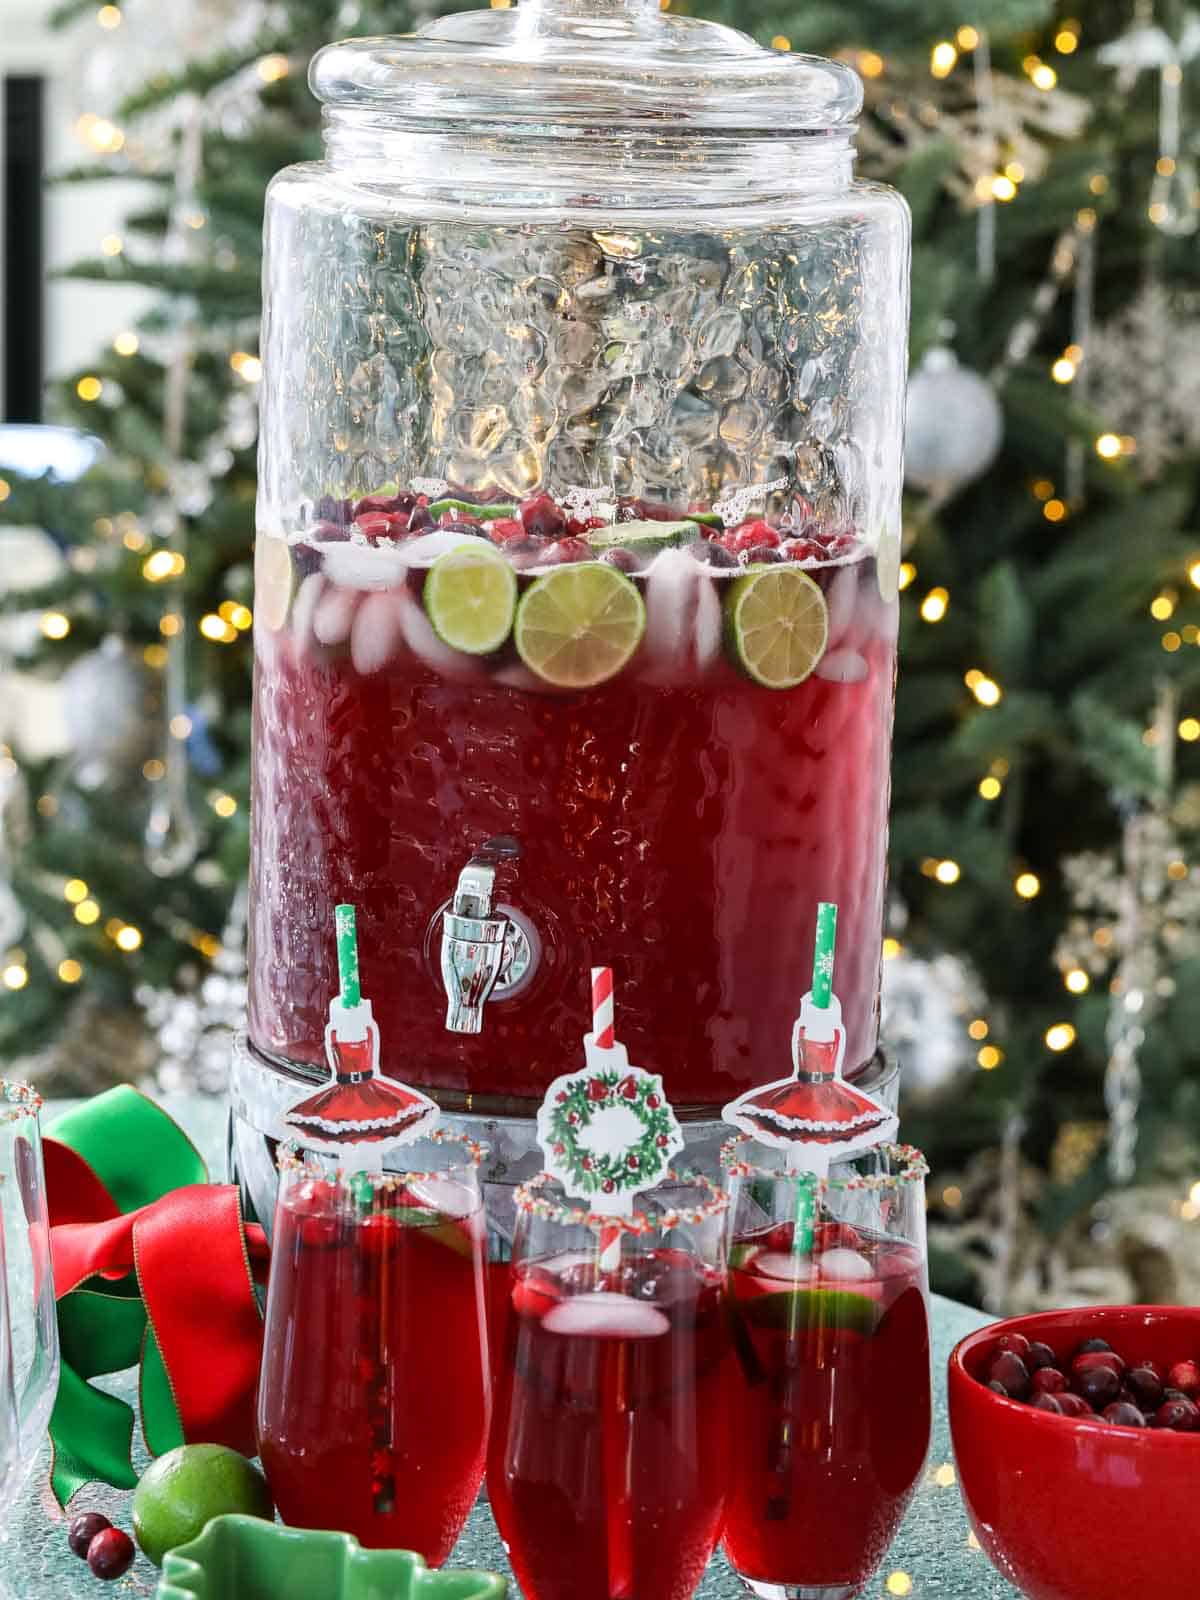 https://www.delicioustable.com/wp-content/uploads/2022/11/Christmas-Punch-glasses-and-tree.jpg